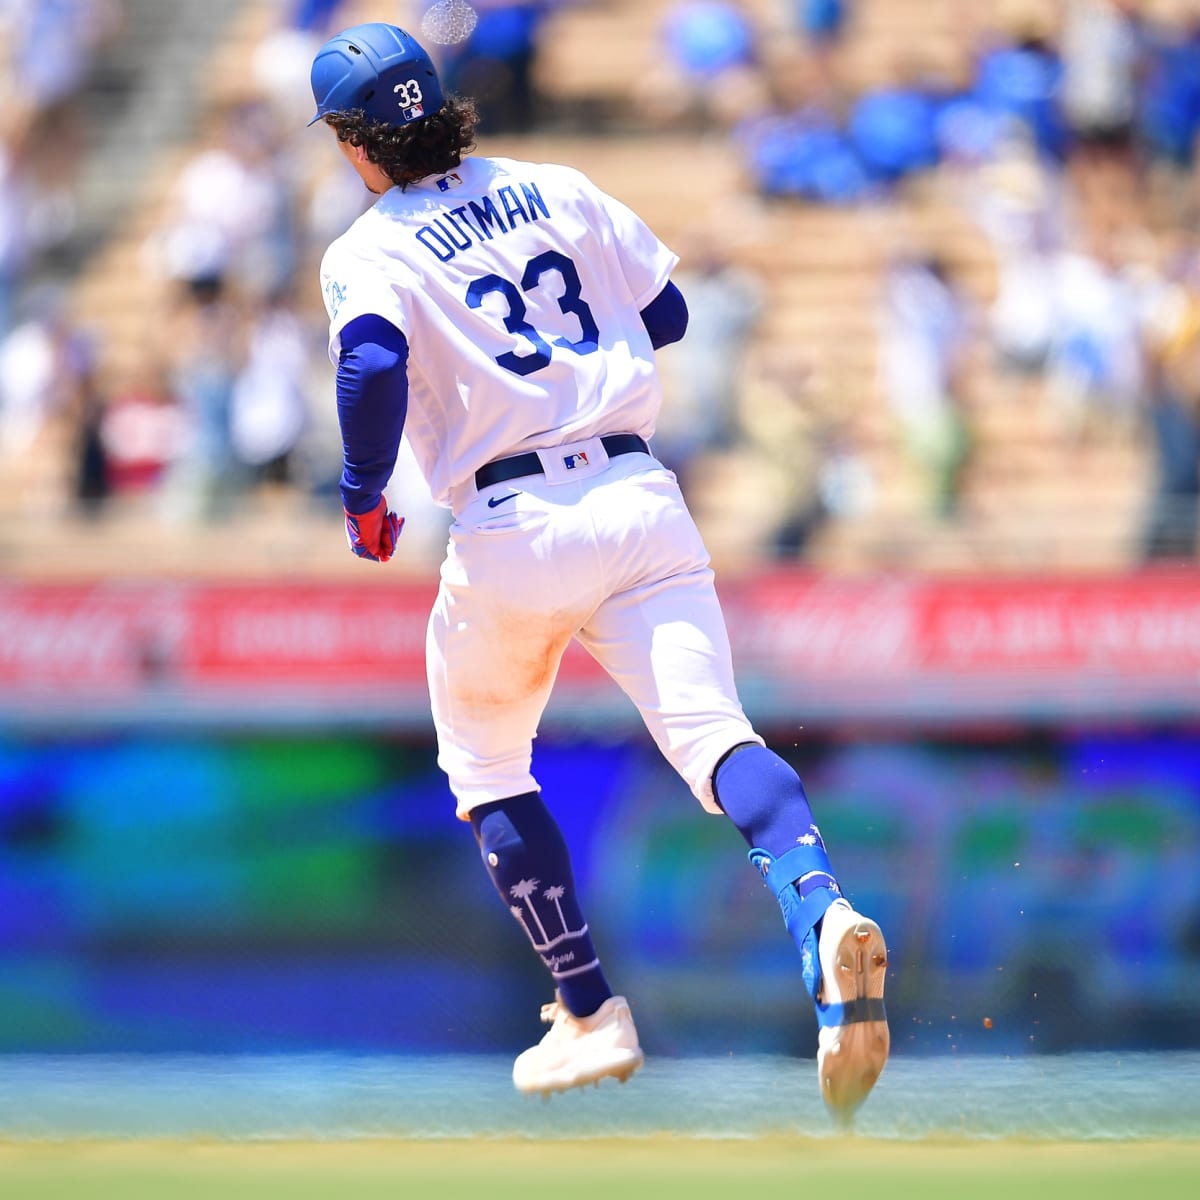 Los Angeles Dodgers' James Outman Accomplishes Something Not Done